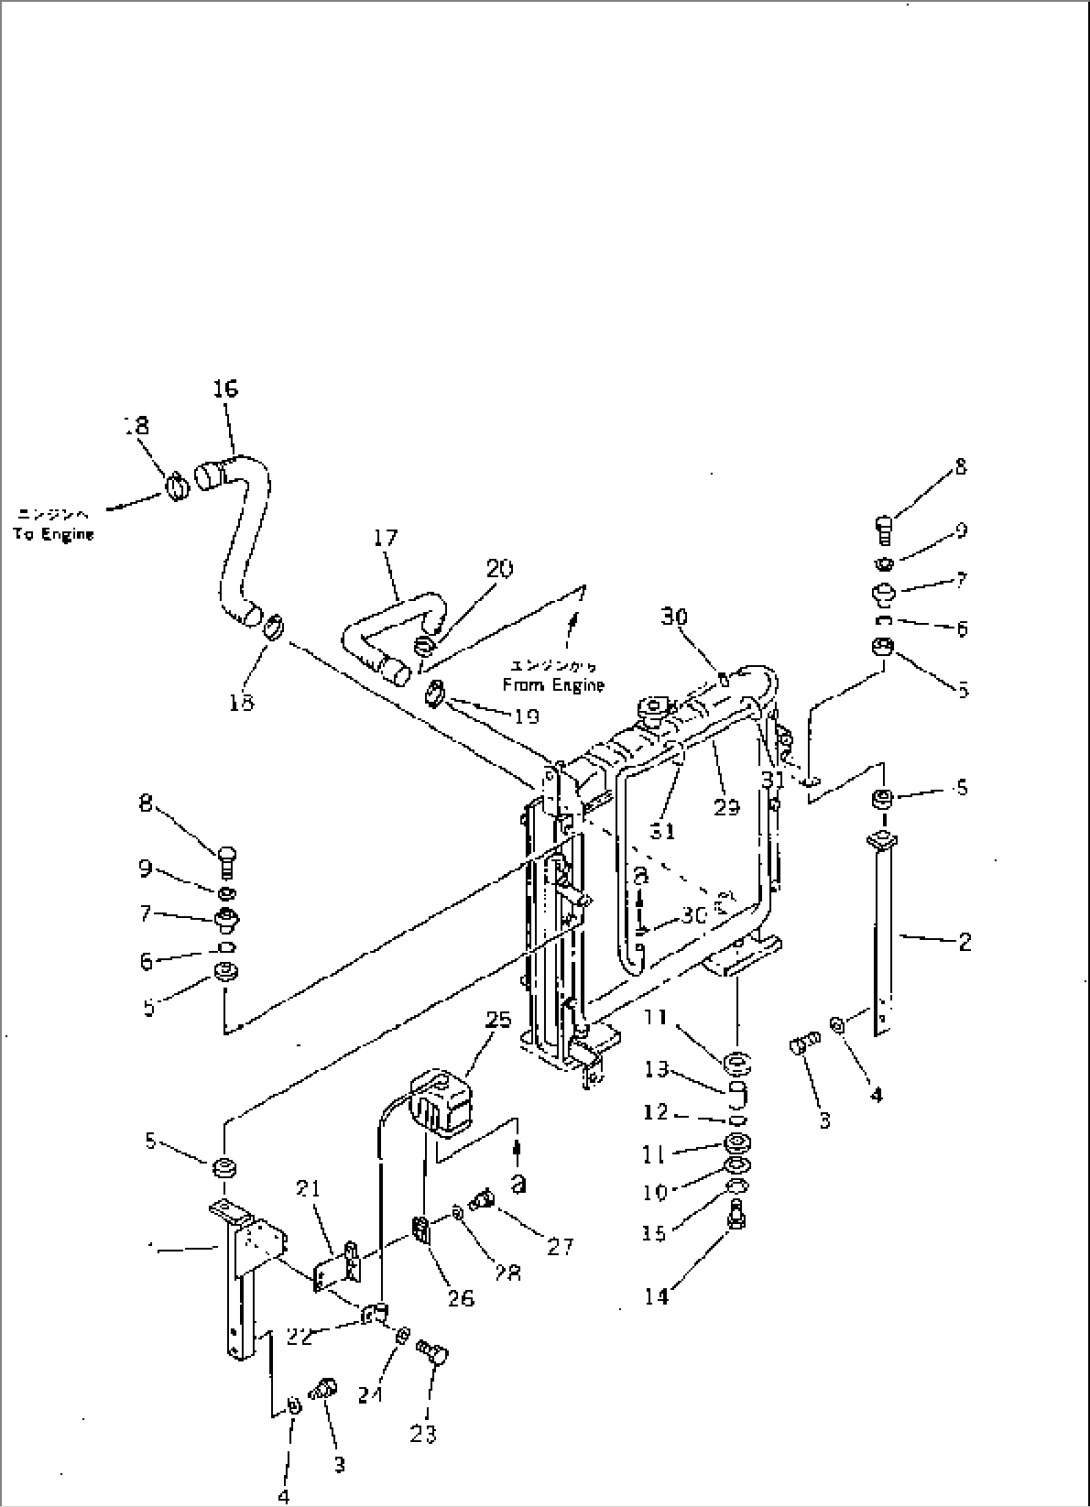 RADIATOR MOUNT AND PIPING(#2301-)